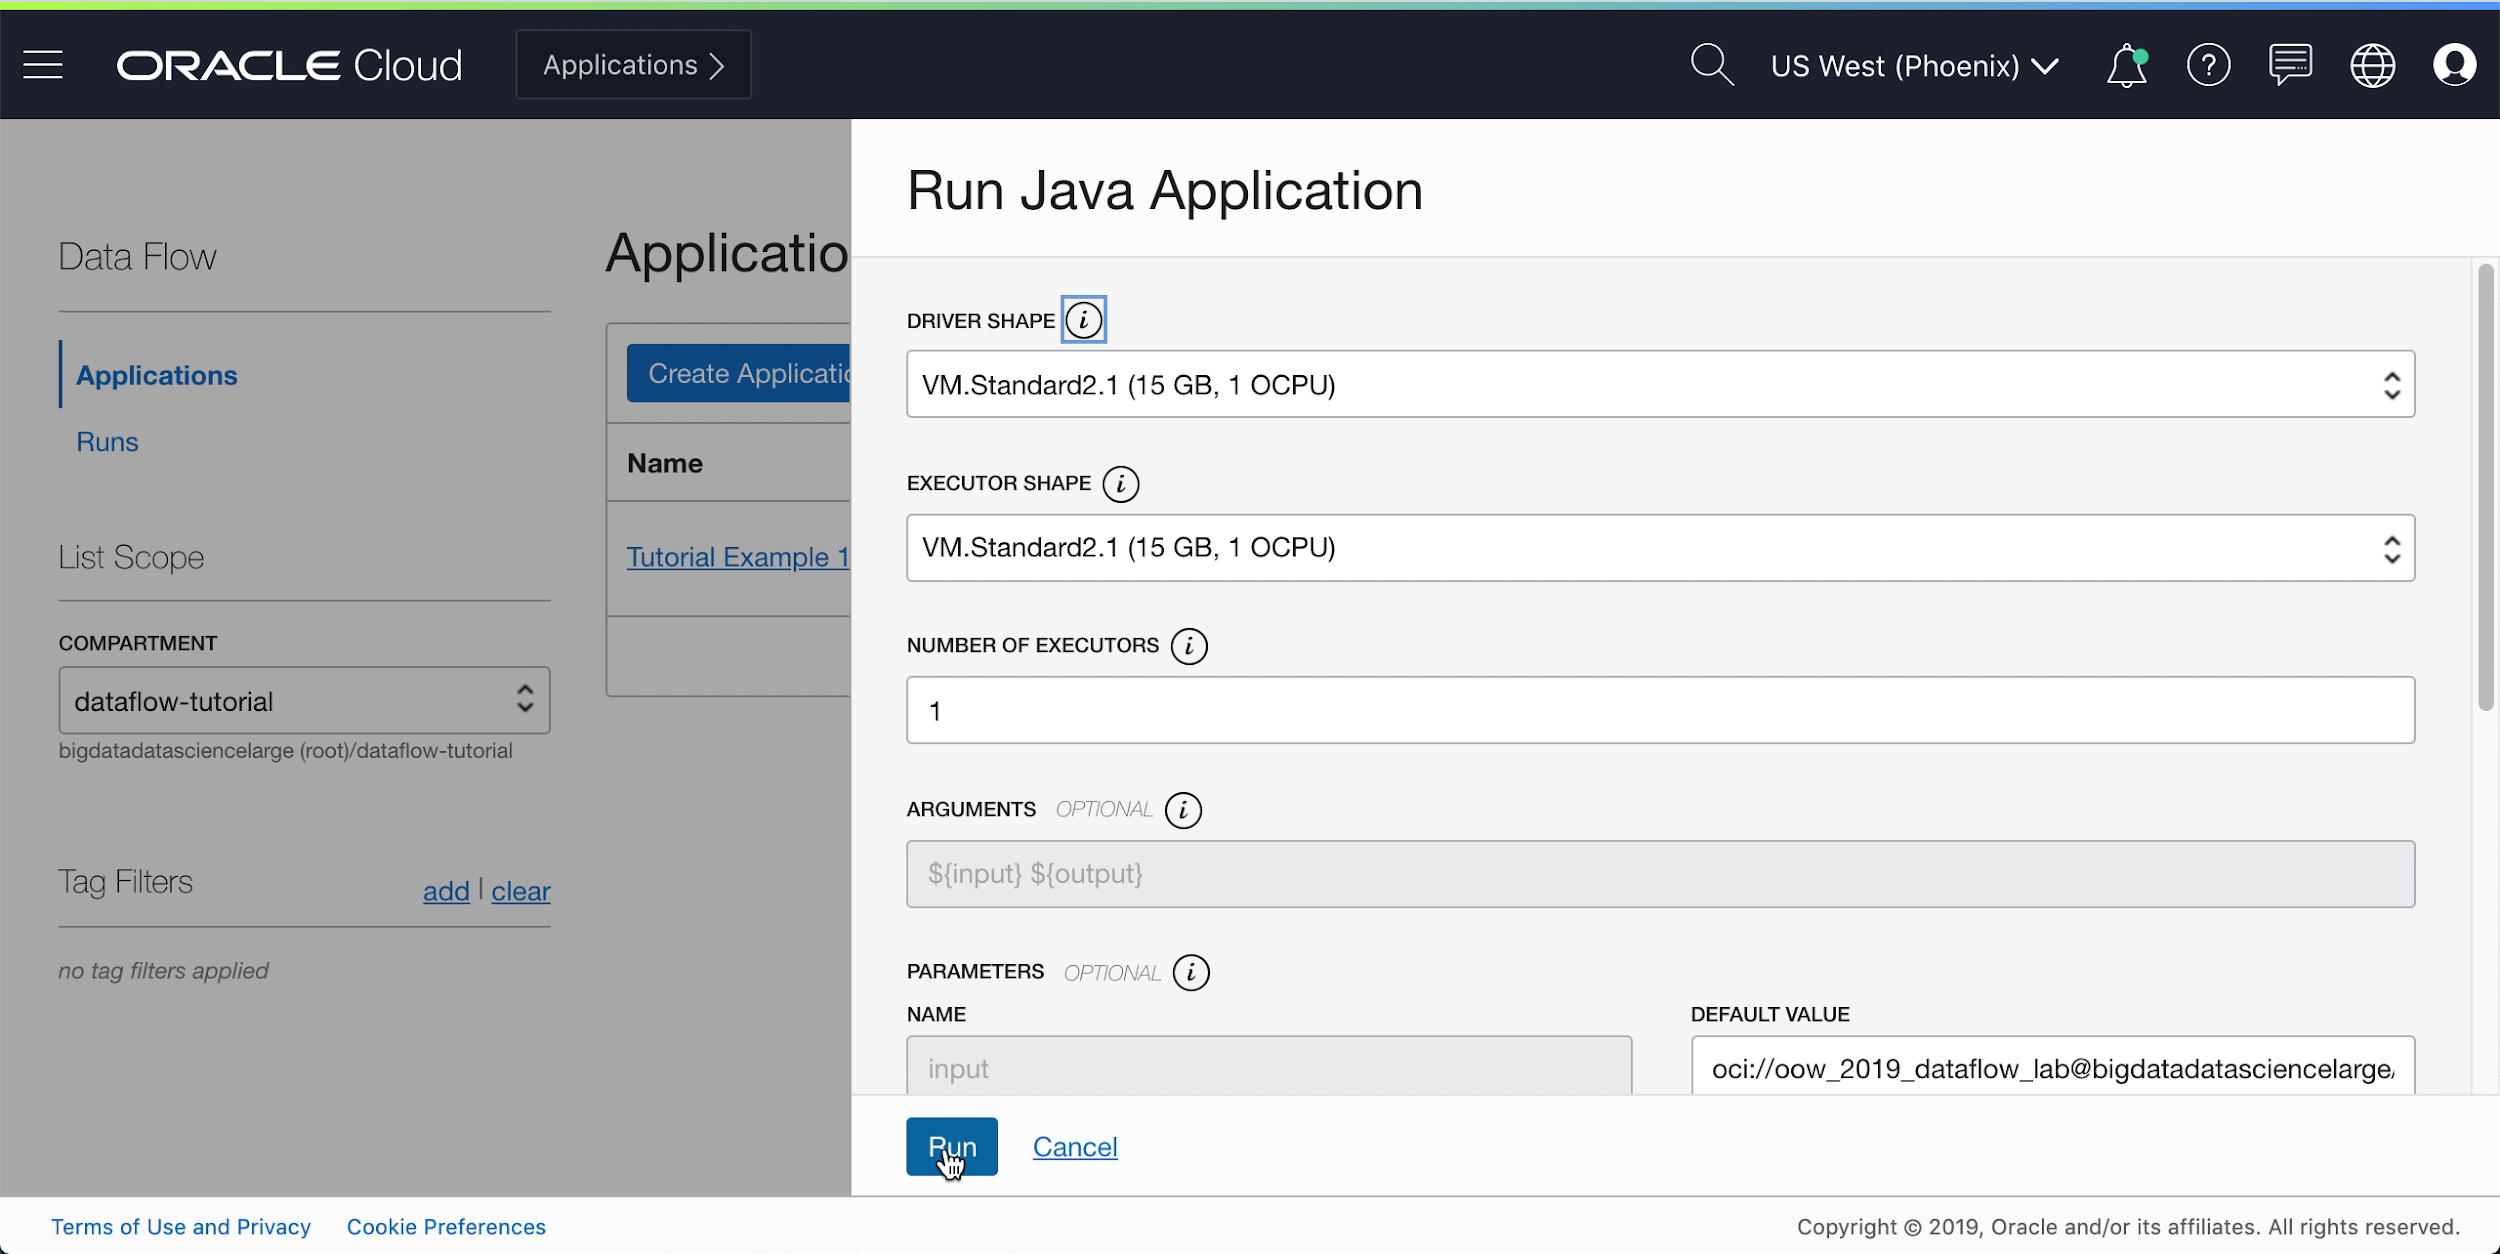 The Run Java Application pull-out page displayed over the right-hand side of the Applications page. At the top is a drop-down list called Driver Shape; VM.Standard2.1 (15GB, 1 OCPU) is selected. Below is a drop-down list called Executor Shape; VM.Standard2.1 (15GB, 1 OCPU) is selected. Below is a text field labelled Number of Executors; it contains 1. Below is a text field called Arguments. It is greyed-out and contains ${input} ${output}. Below are two text fields side by side for parameters. The first is called Name and is greyed-out, but contains input. The other is called Default Value and contains the input directory, but can be edited. There is a scroll bar to the right which is at the top position. At the bottom of the screen are two buttons, Run and Cancel. Run is about to be clicked.